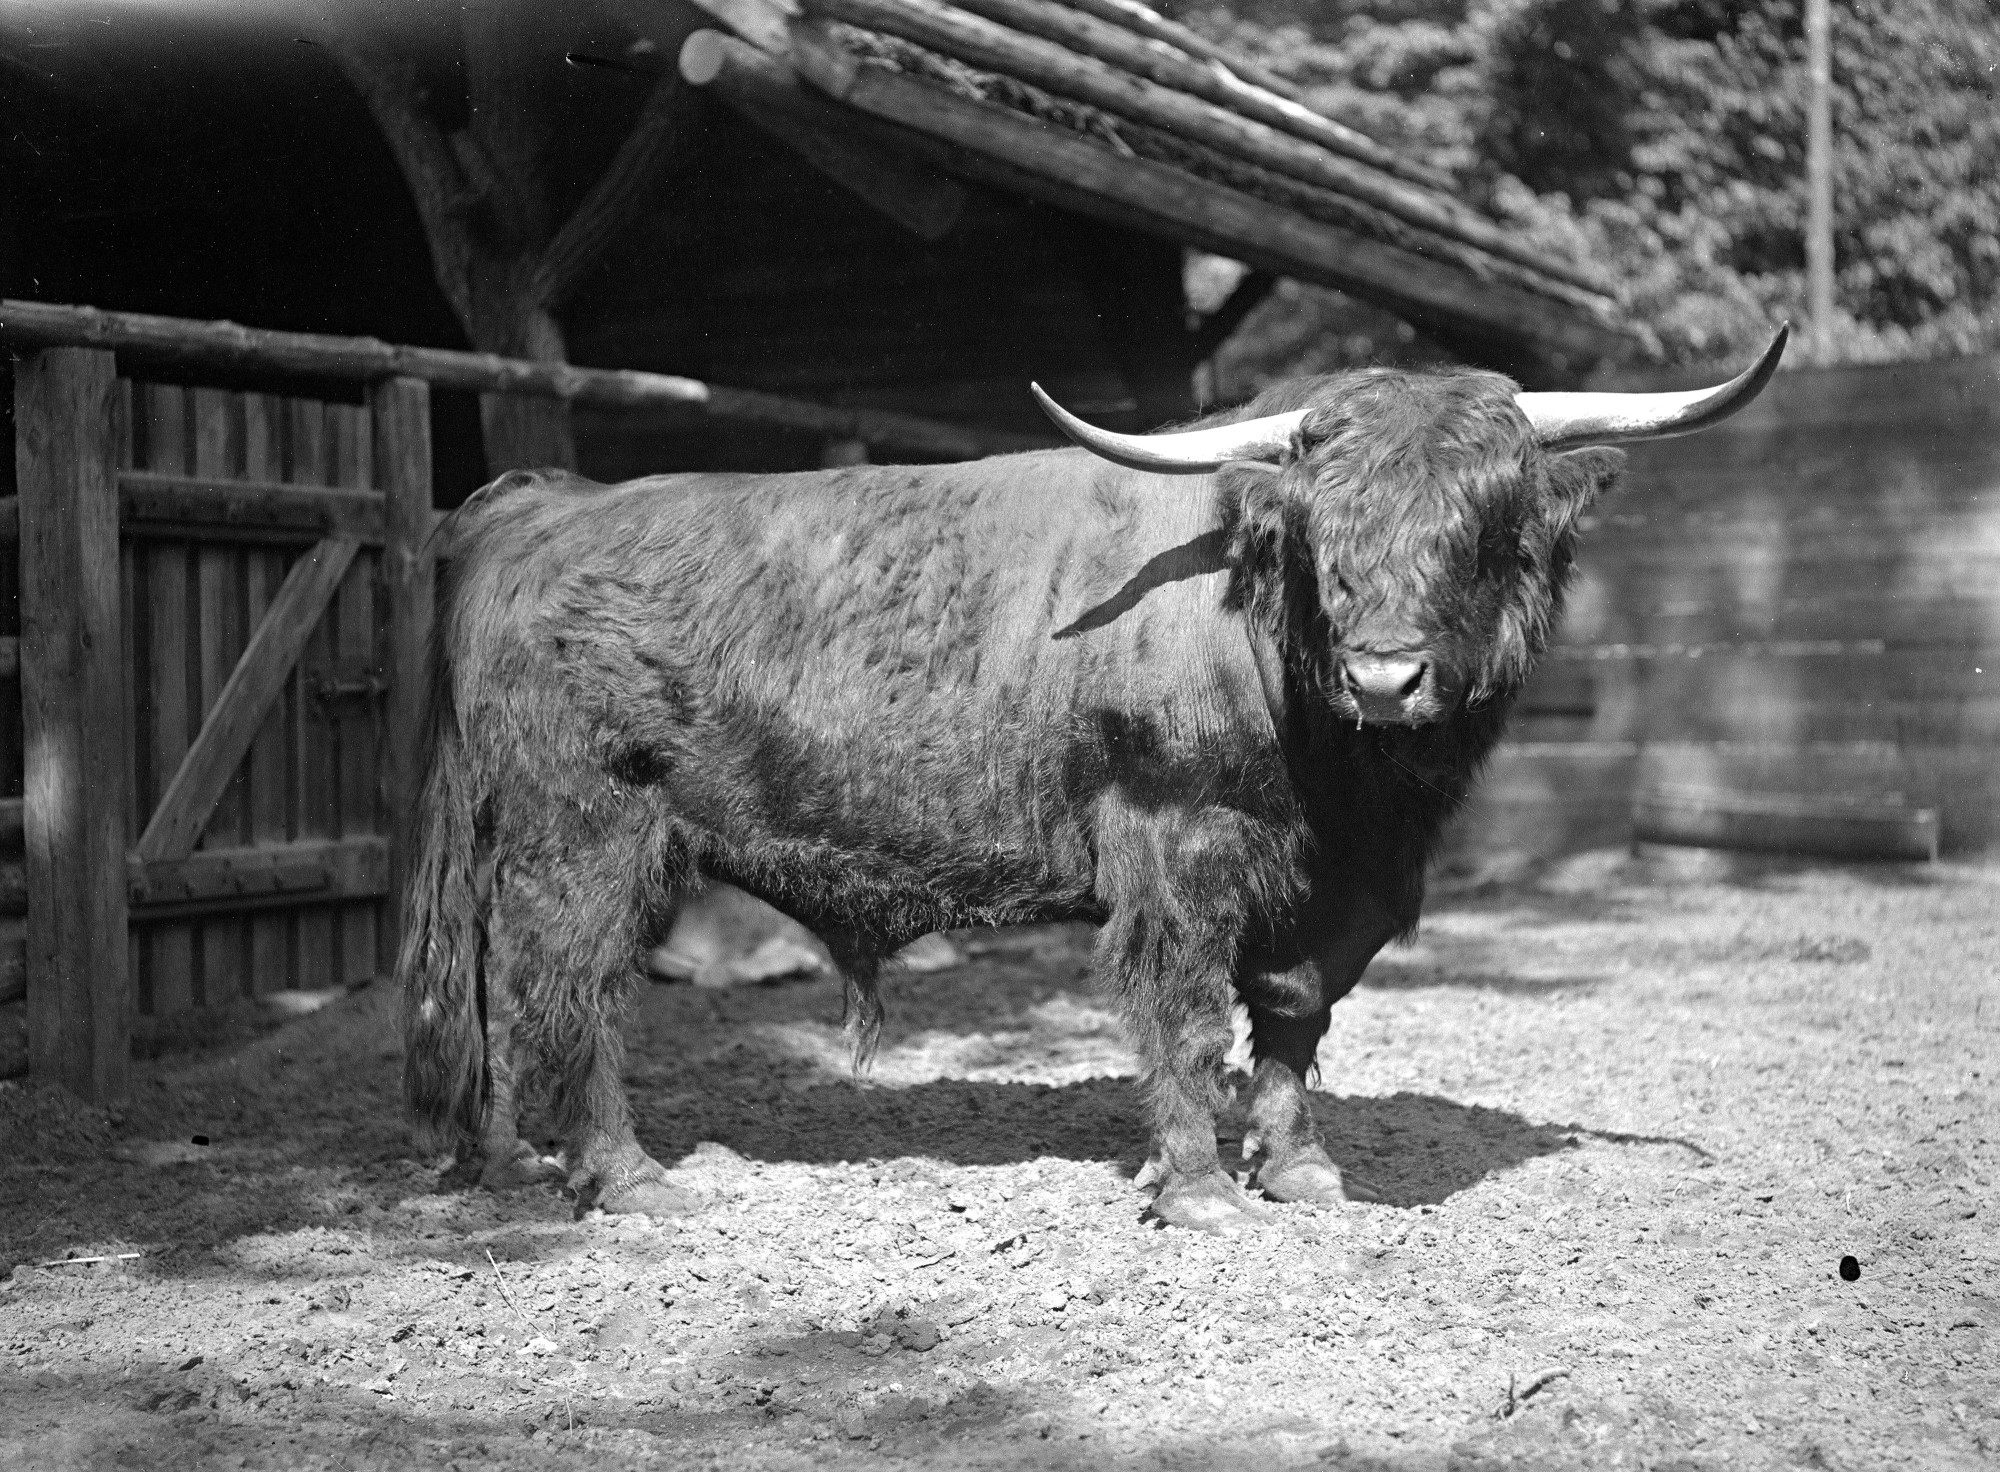 Black and white photograph: Cattle on sandy ground, with a wall and wooden structure in the background. The fur on the back is shorter, and shaggy on the legs, head, and tail. The horns grow horizontally, curving up and forward only at the tips.